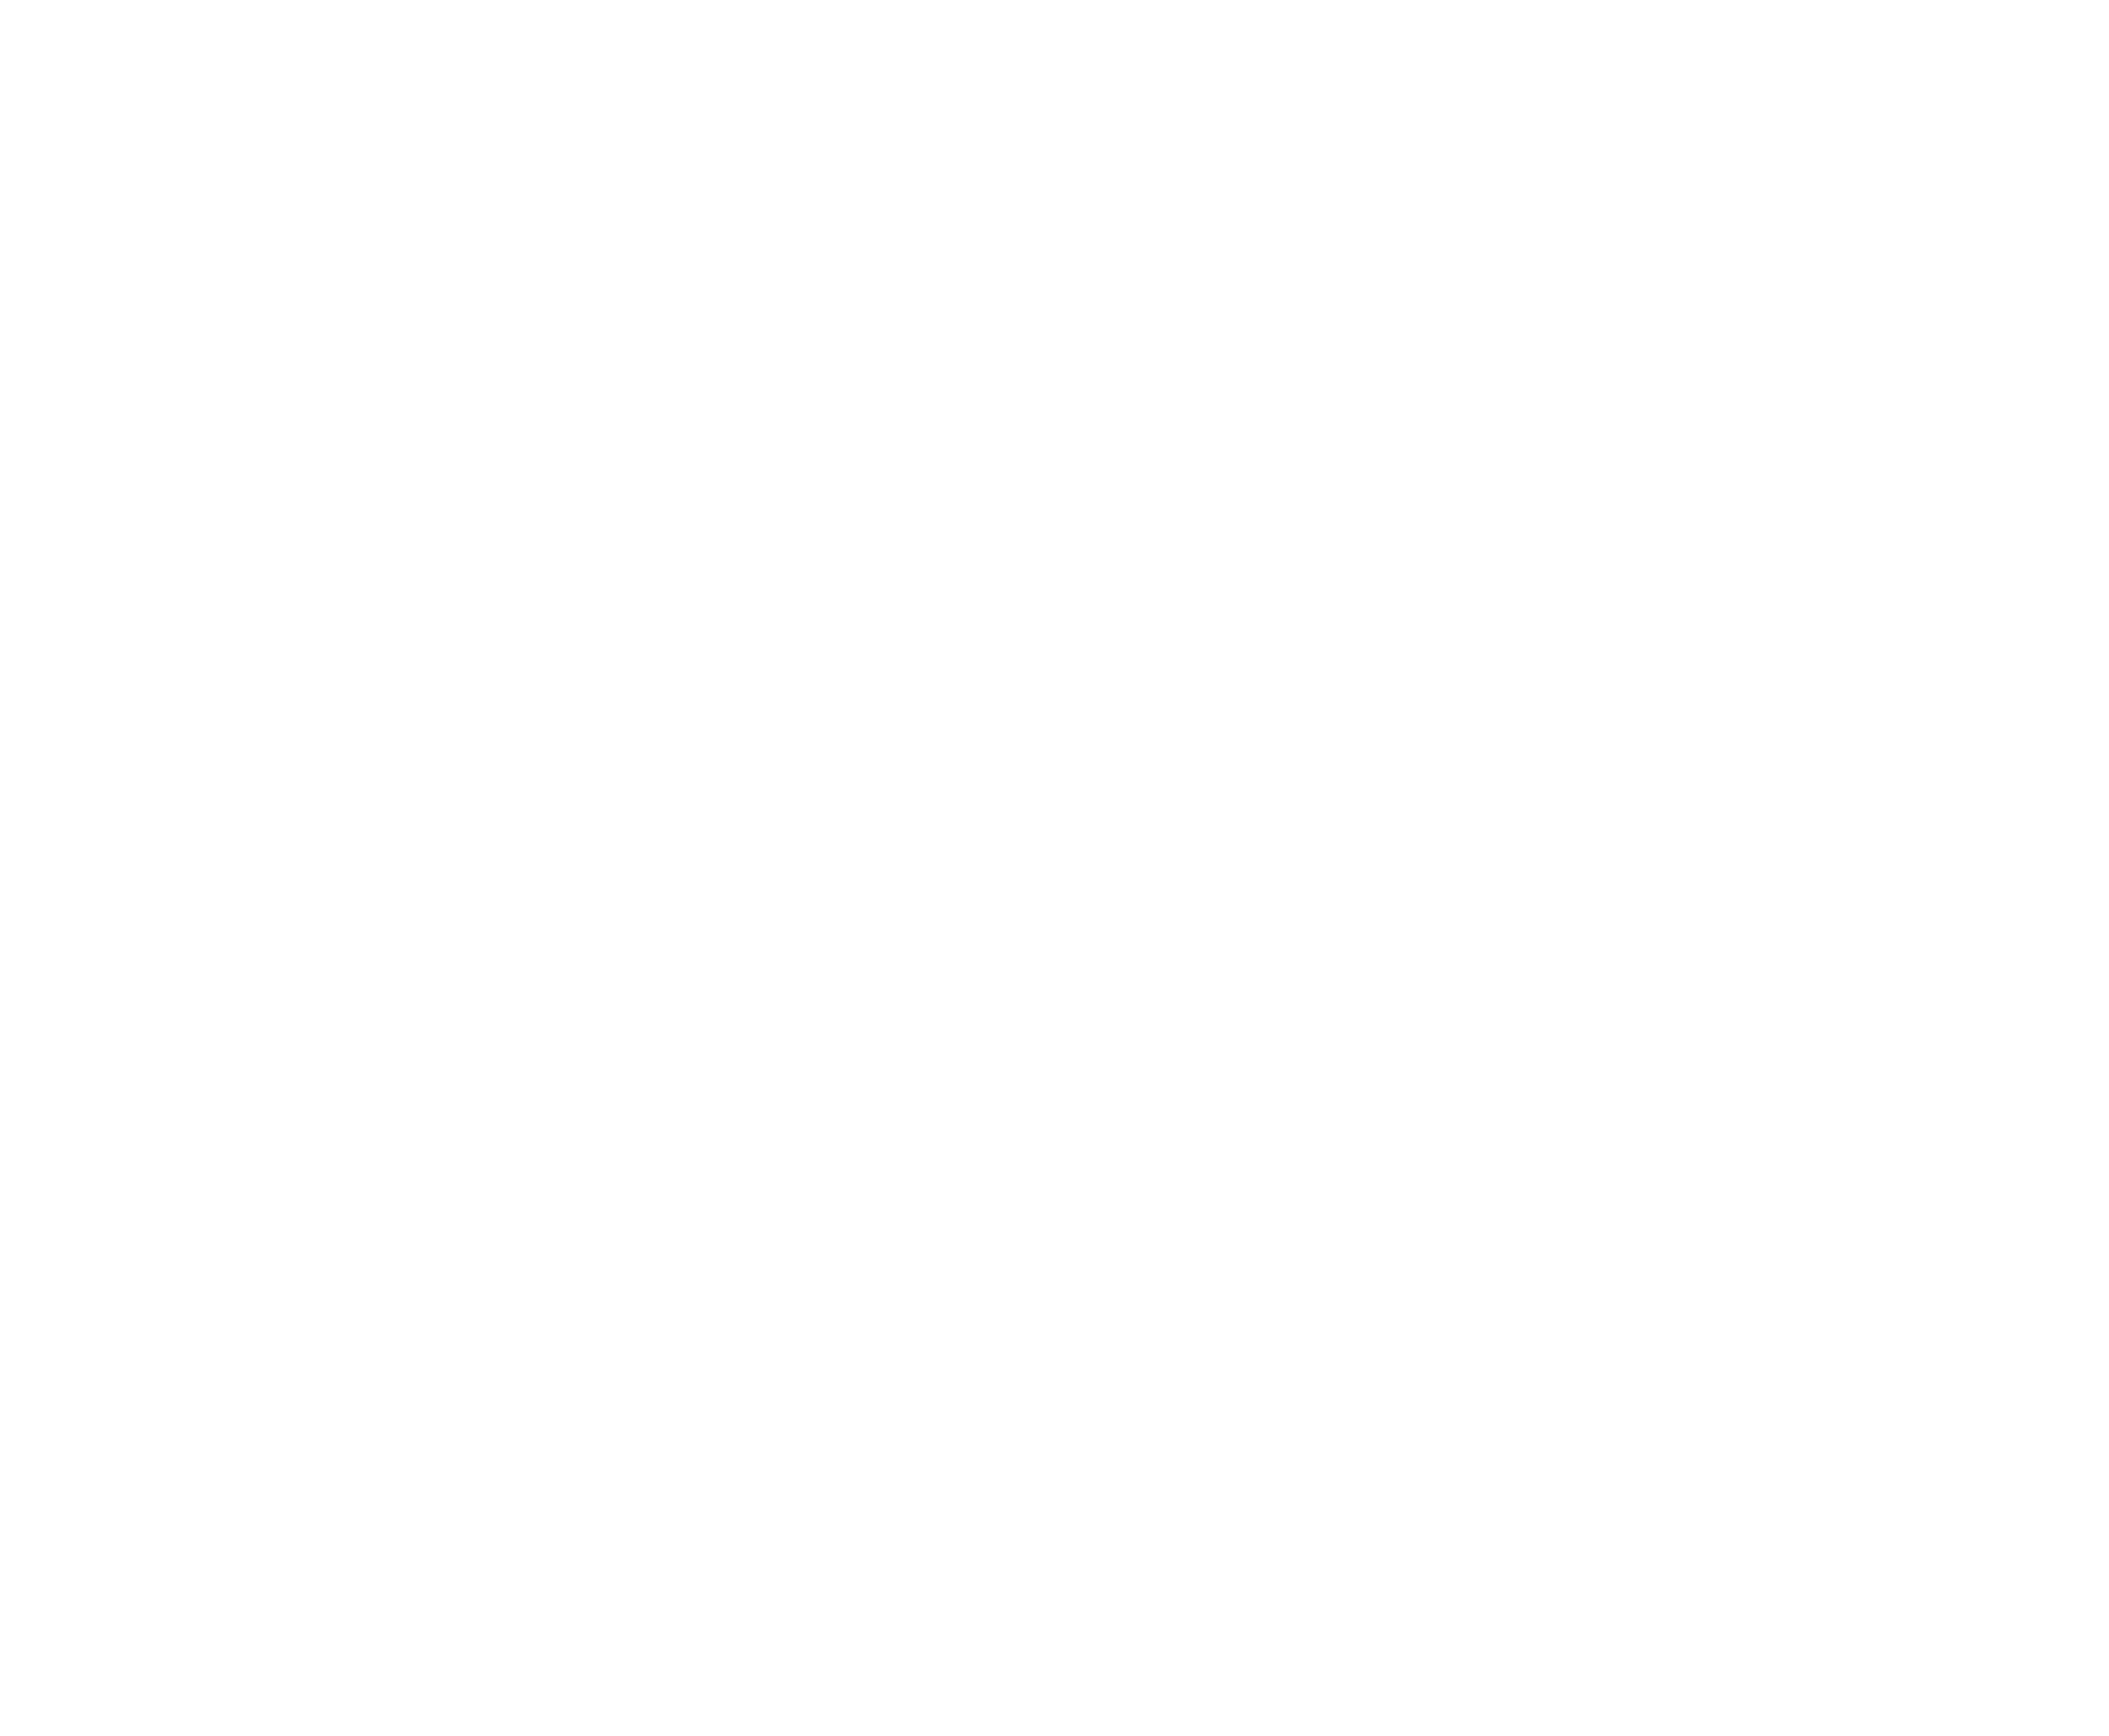 The Dunts